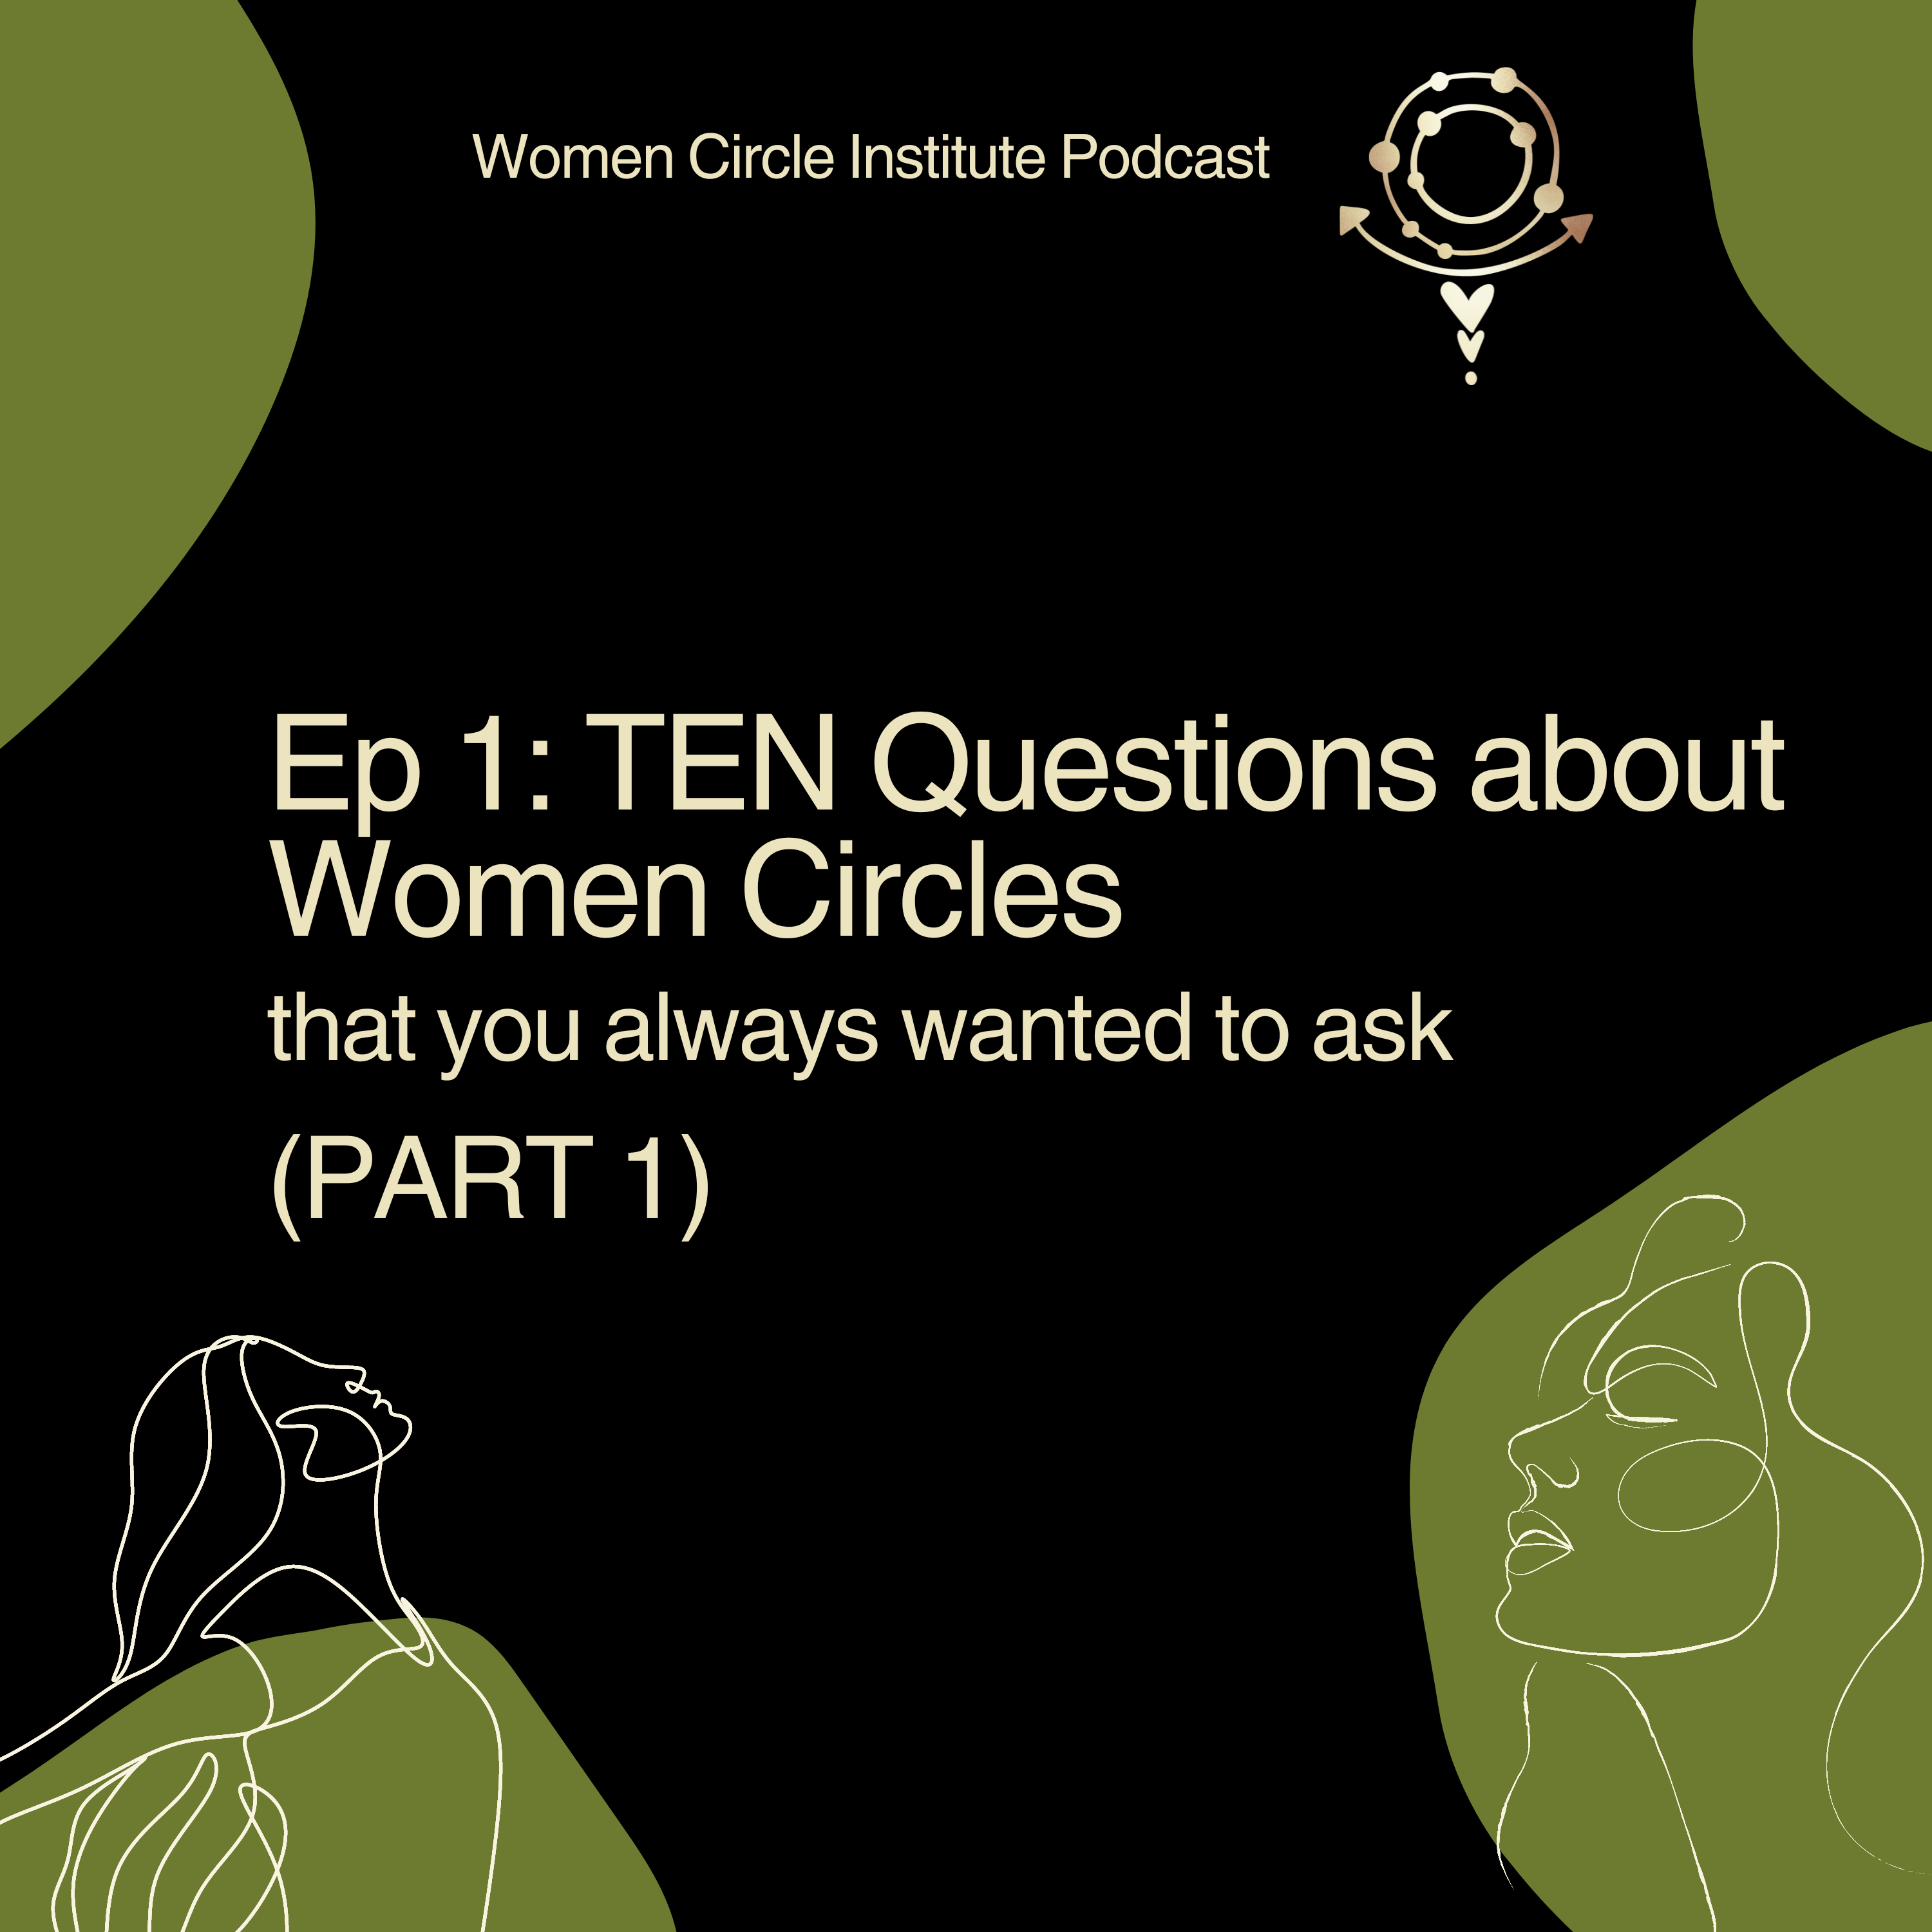 Ep 1: Ten Questions about Women's Circles that you always wanted to ask (PART 1)